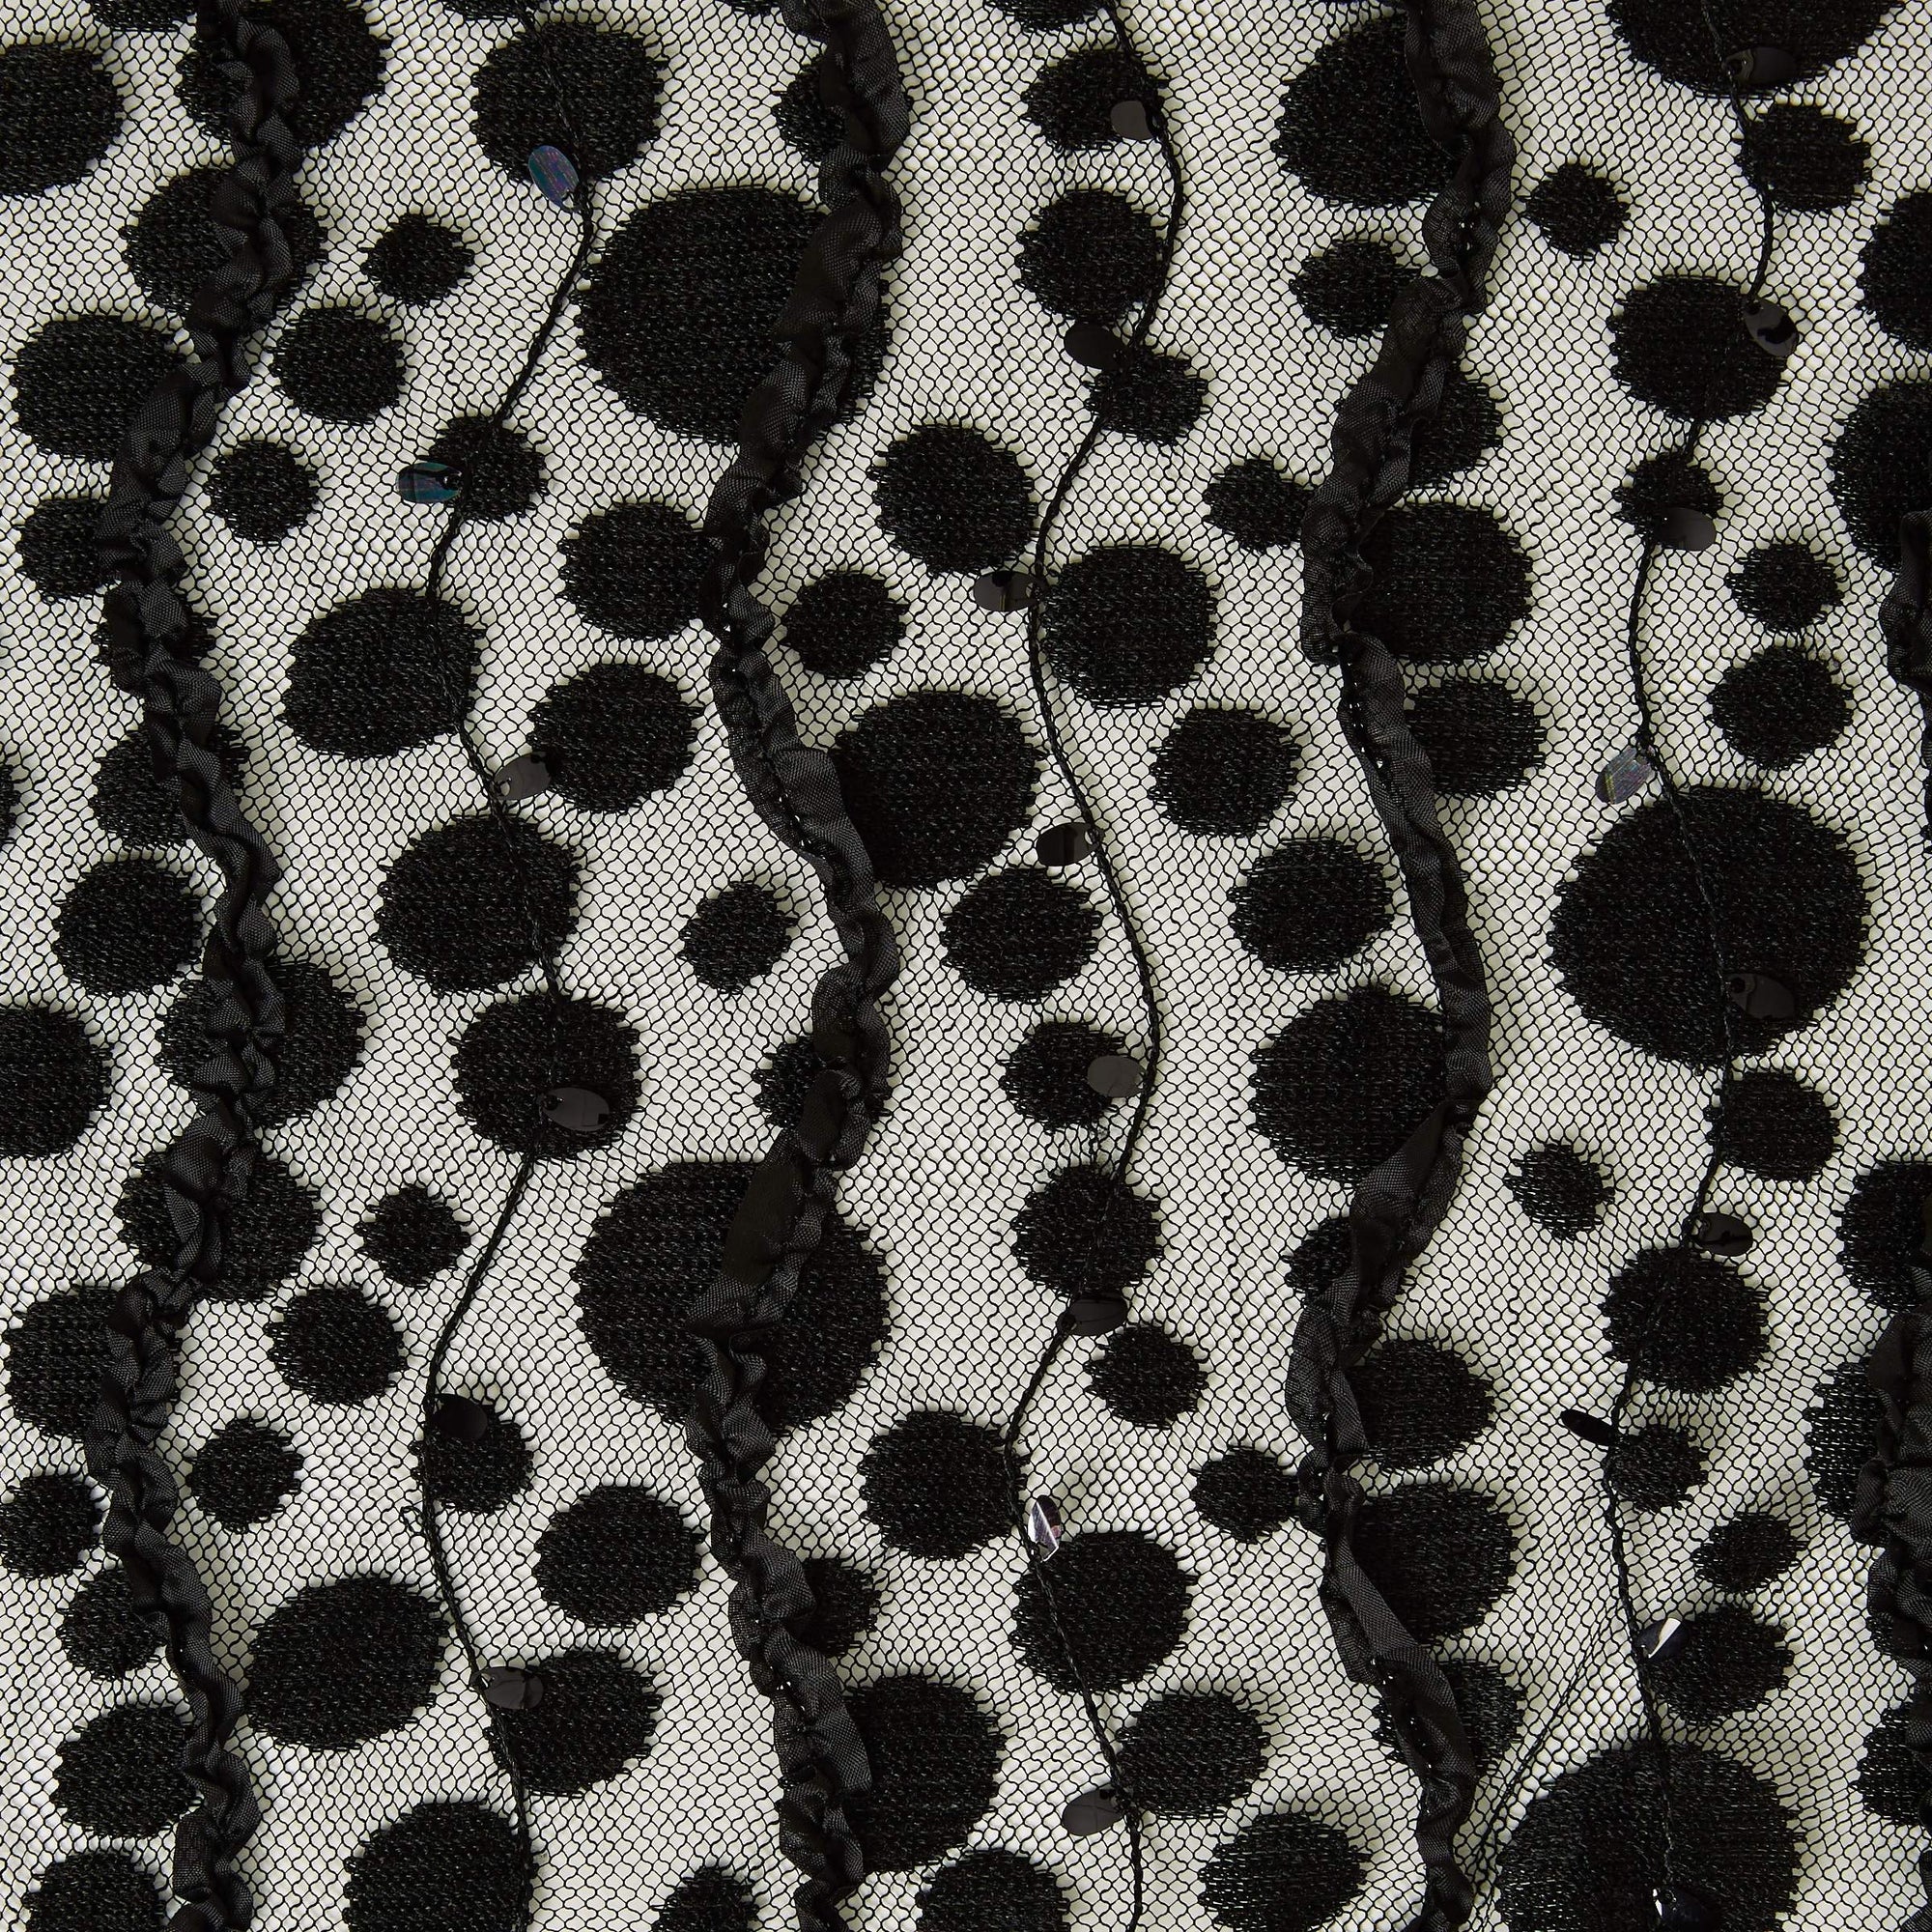 Dazzle displaying a fabric featuring black spots and ribbon embroidered on black colored mesh as a polyester and nylon blend